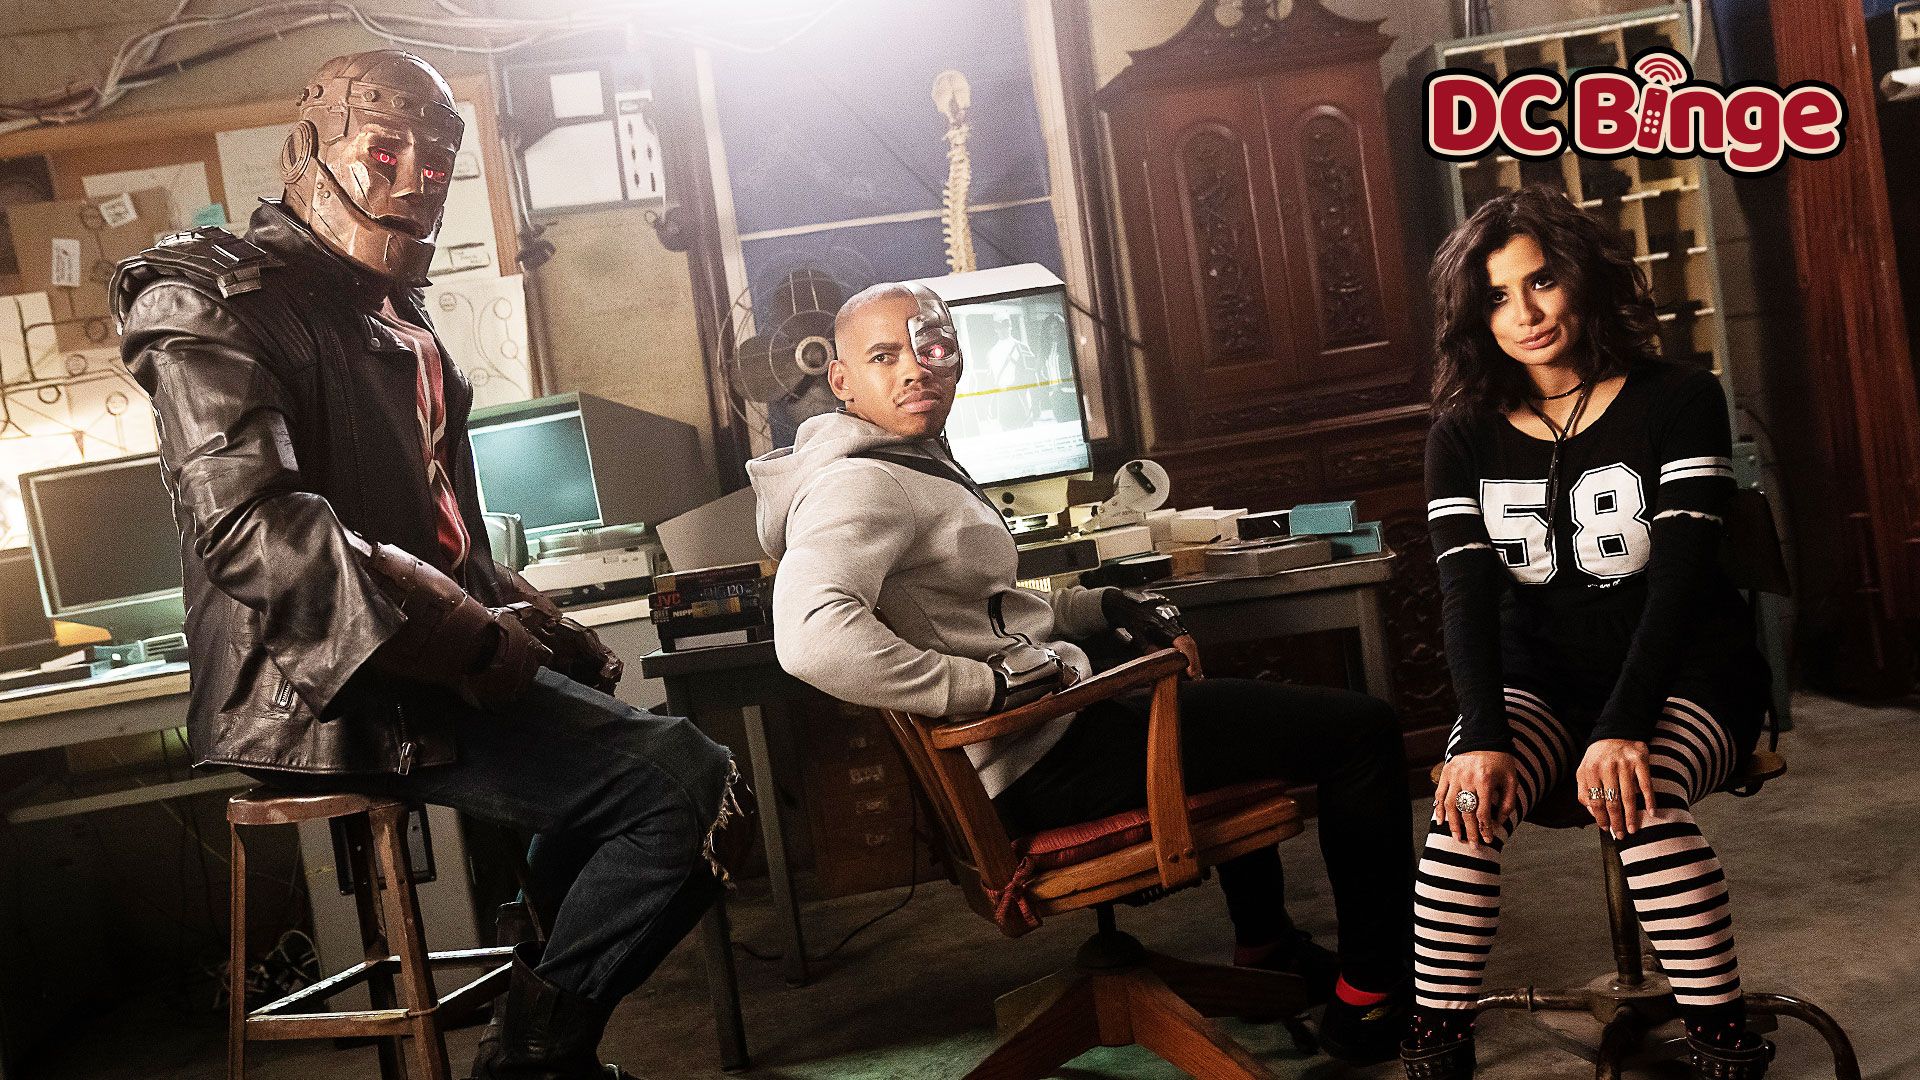 Doom Patrol is the Perfect Superhero Show for Our Strange Times